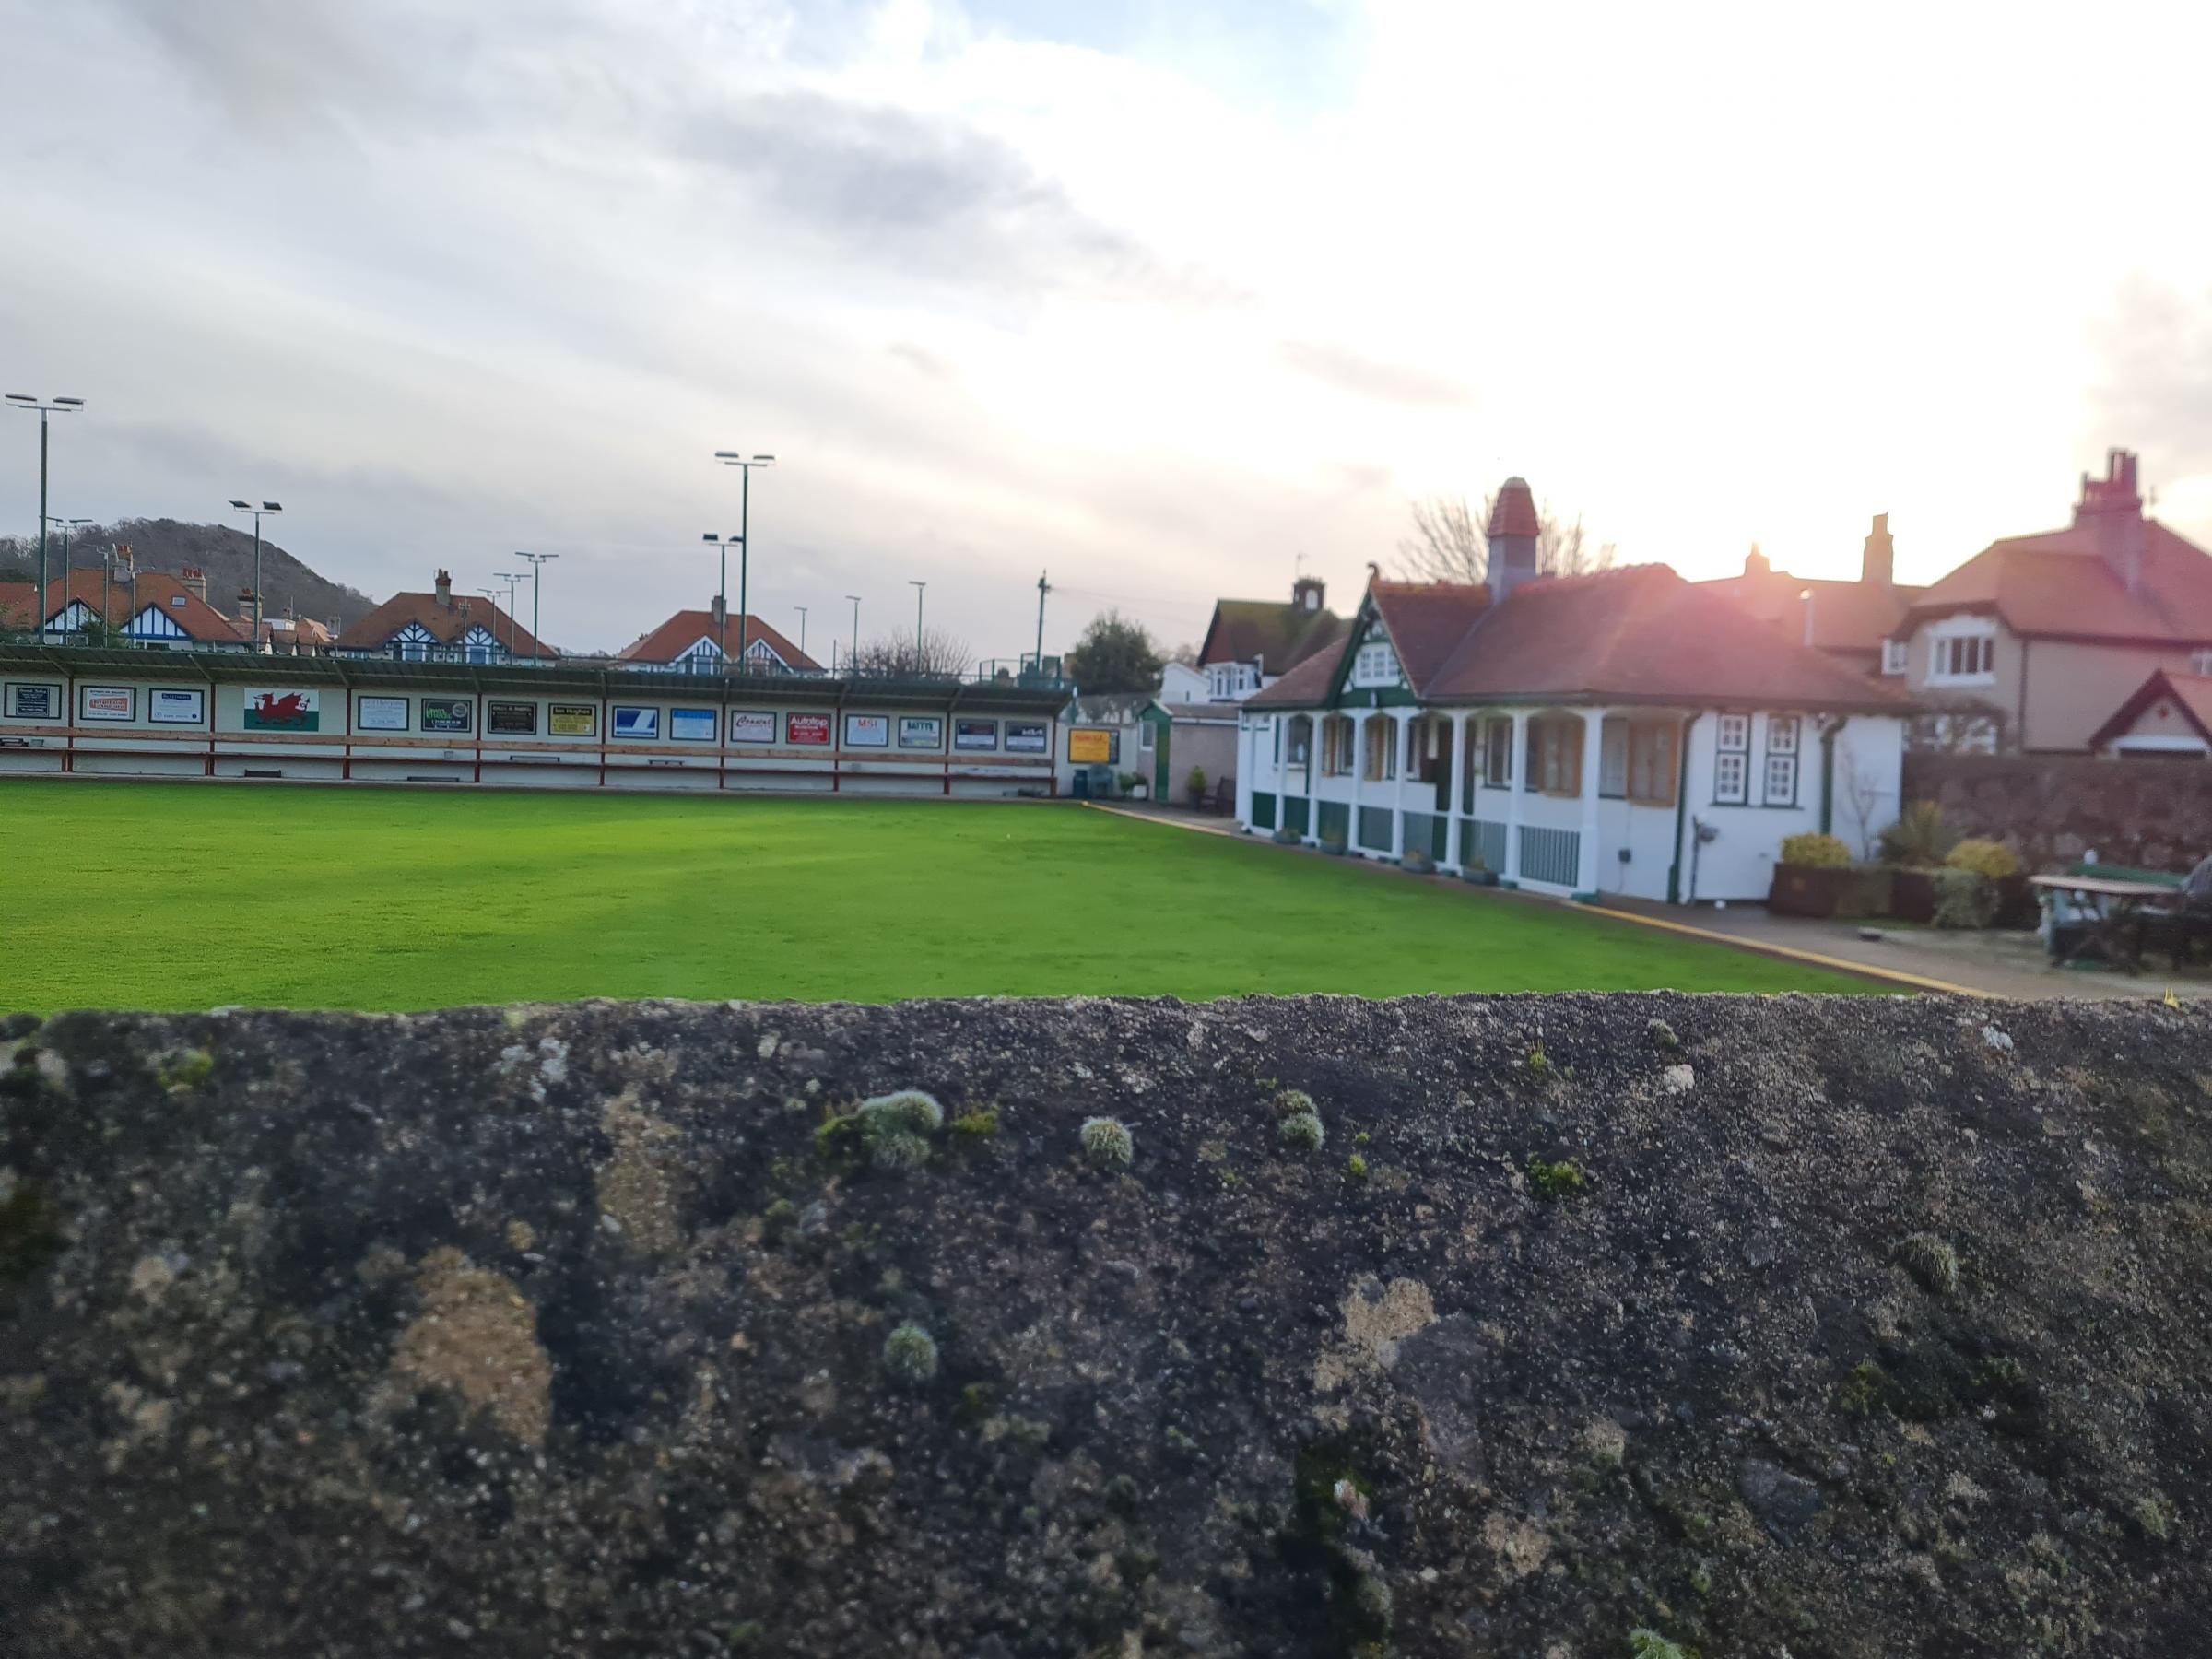 Mr John Hannah has applied to Conwy’s planning department, seeking permission to build a club house featuring a lounge, kitchen, and two toilets on the grassed area at Craig y Don Community Centre on Queen’s Road..